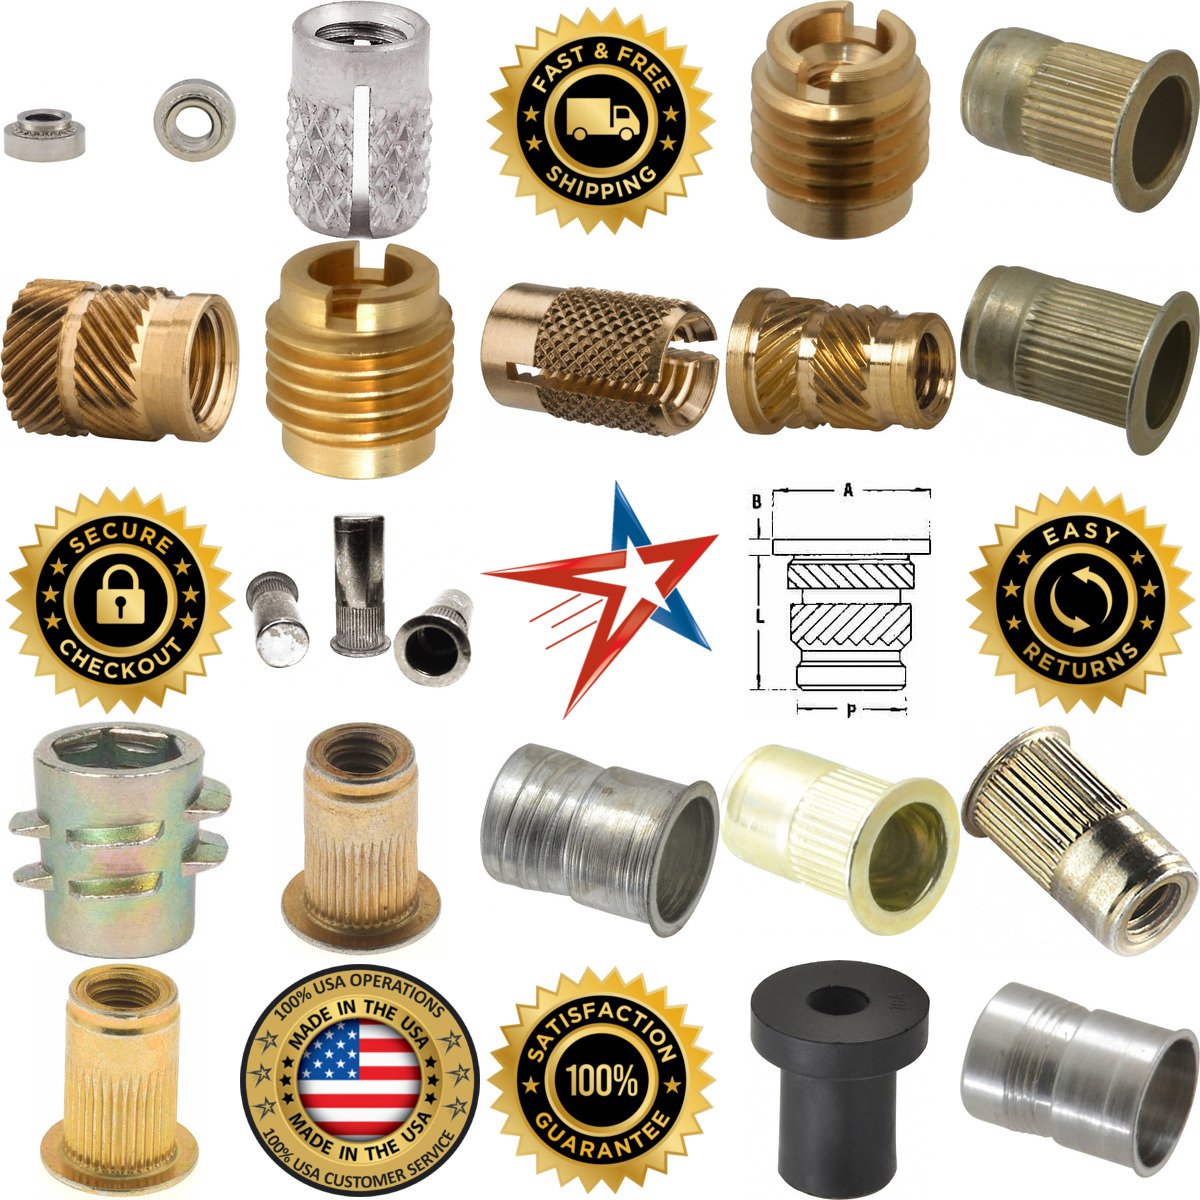 A selection of Threaded Inserts Rivet Nuts and Weld Nuts products on GoVets